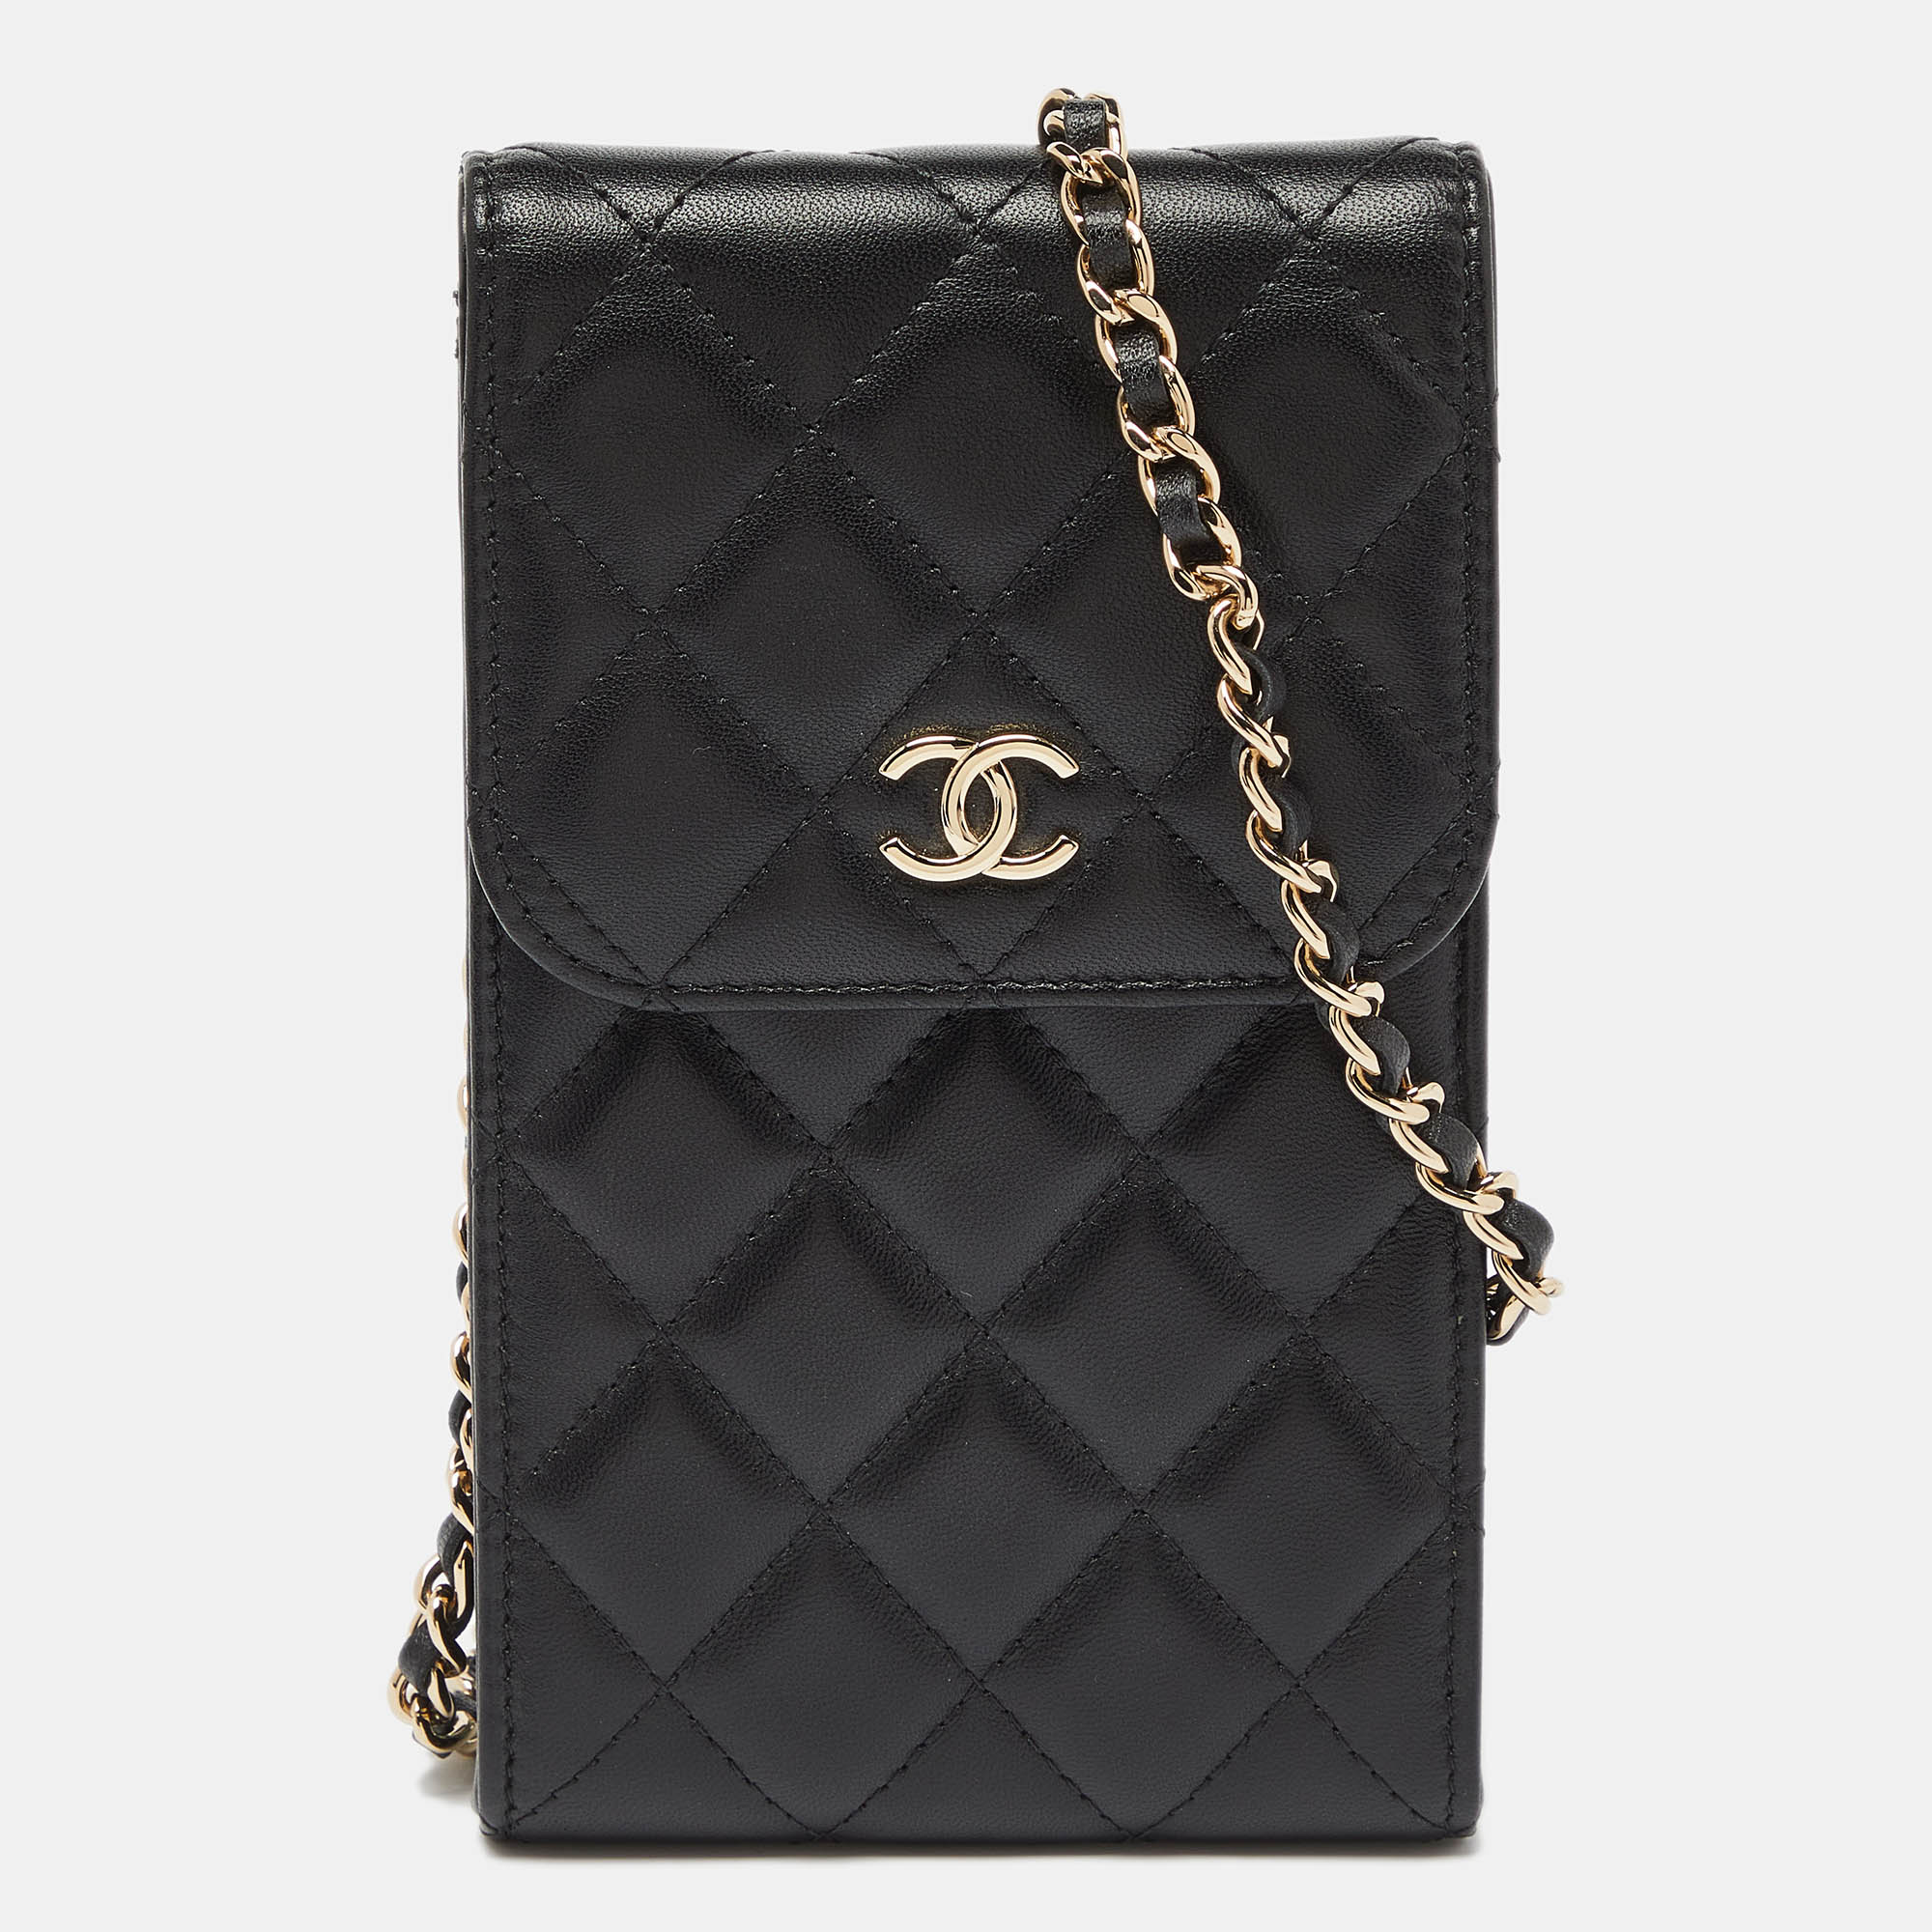 

Chanel Black Quilted Leather Phone Holder Crossbody Bag